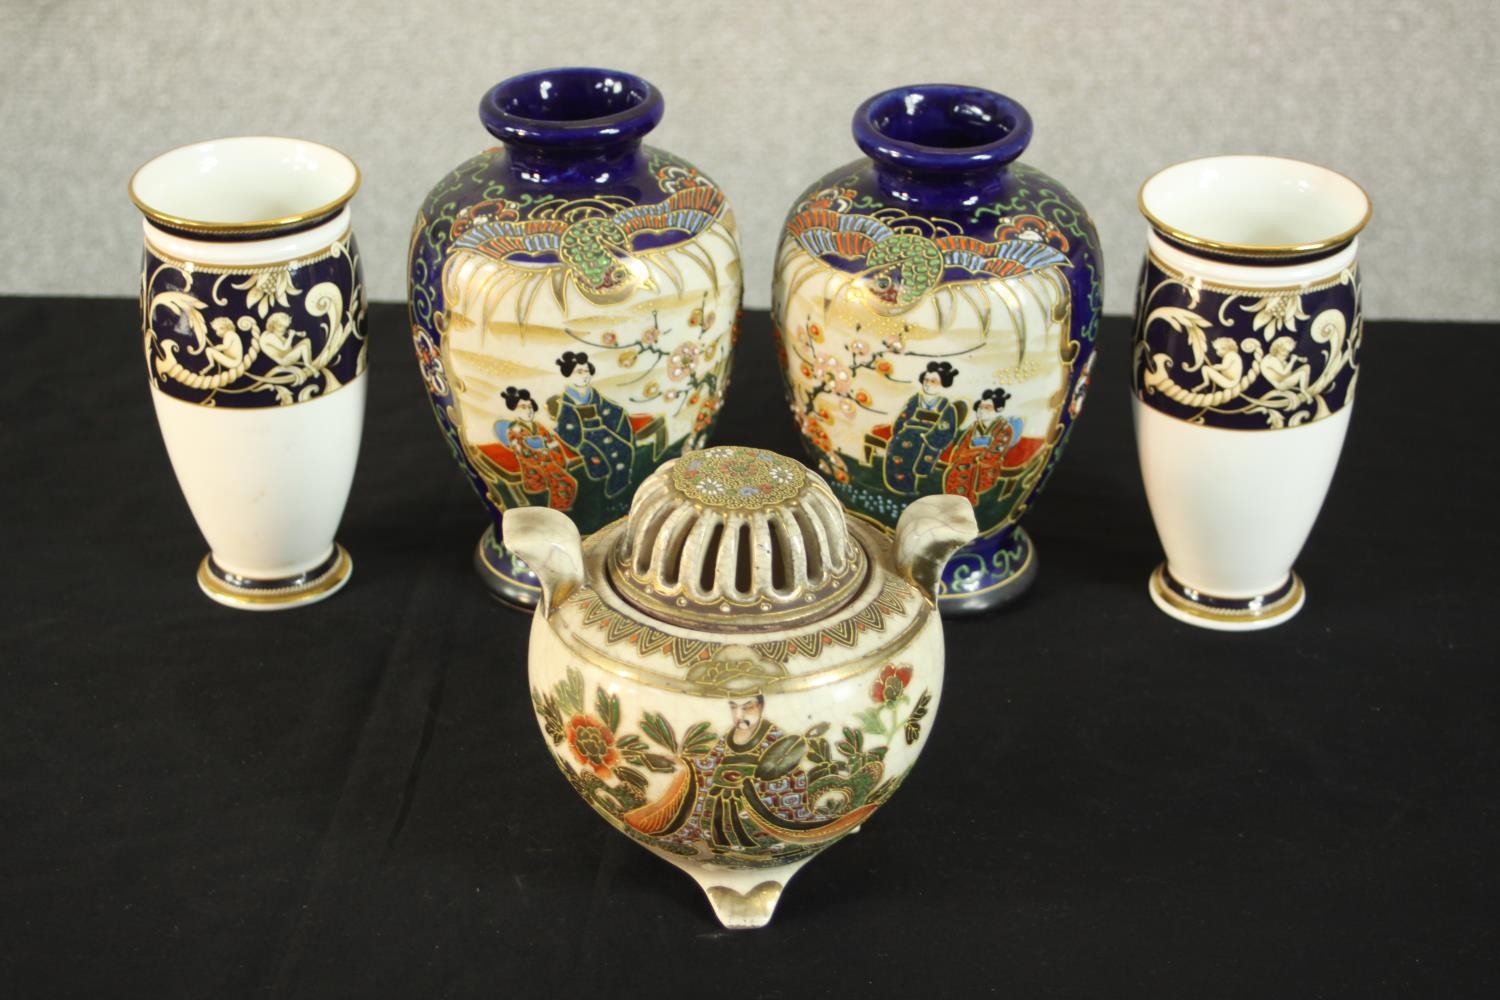 A pair of Japanese Satsuma ware geisha vases and a lidded censer along with a pair of Wedgwood '